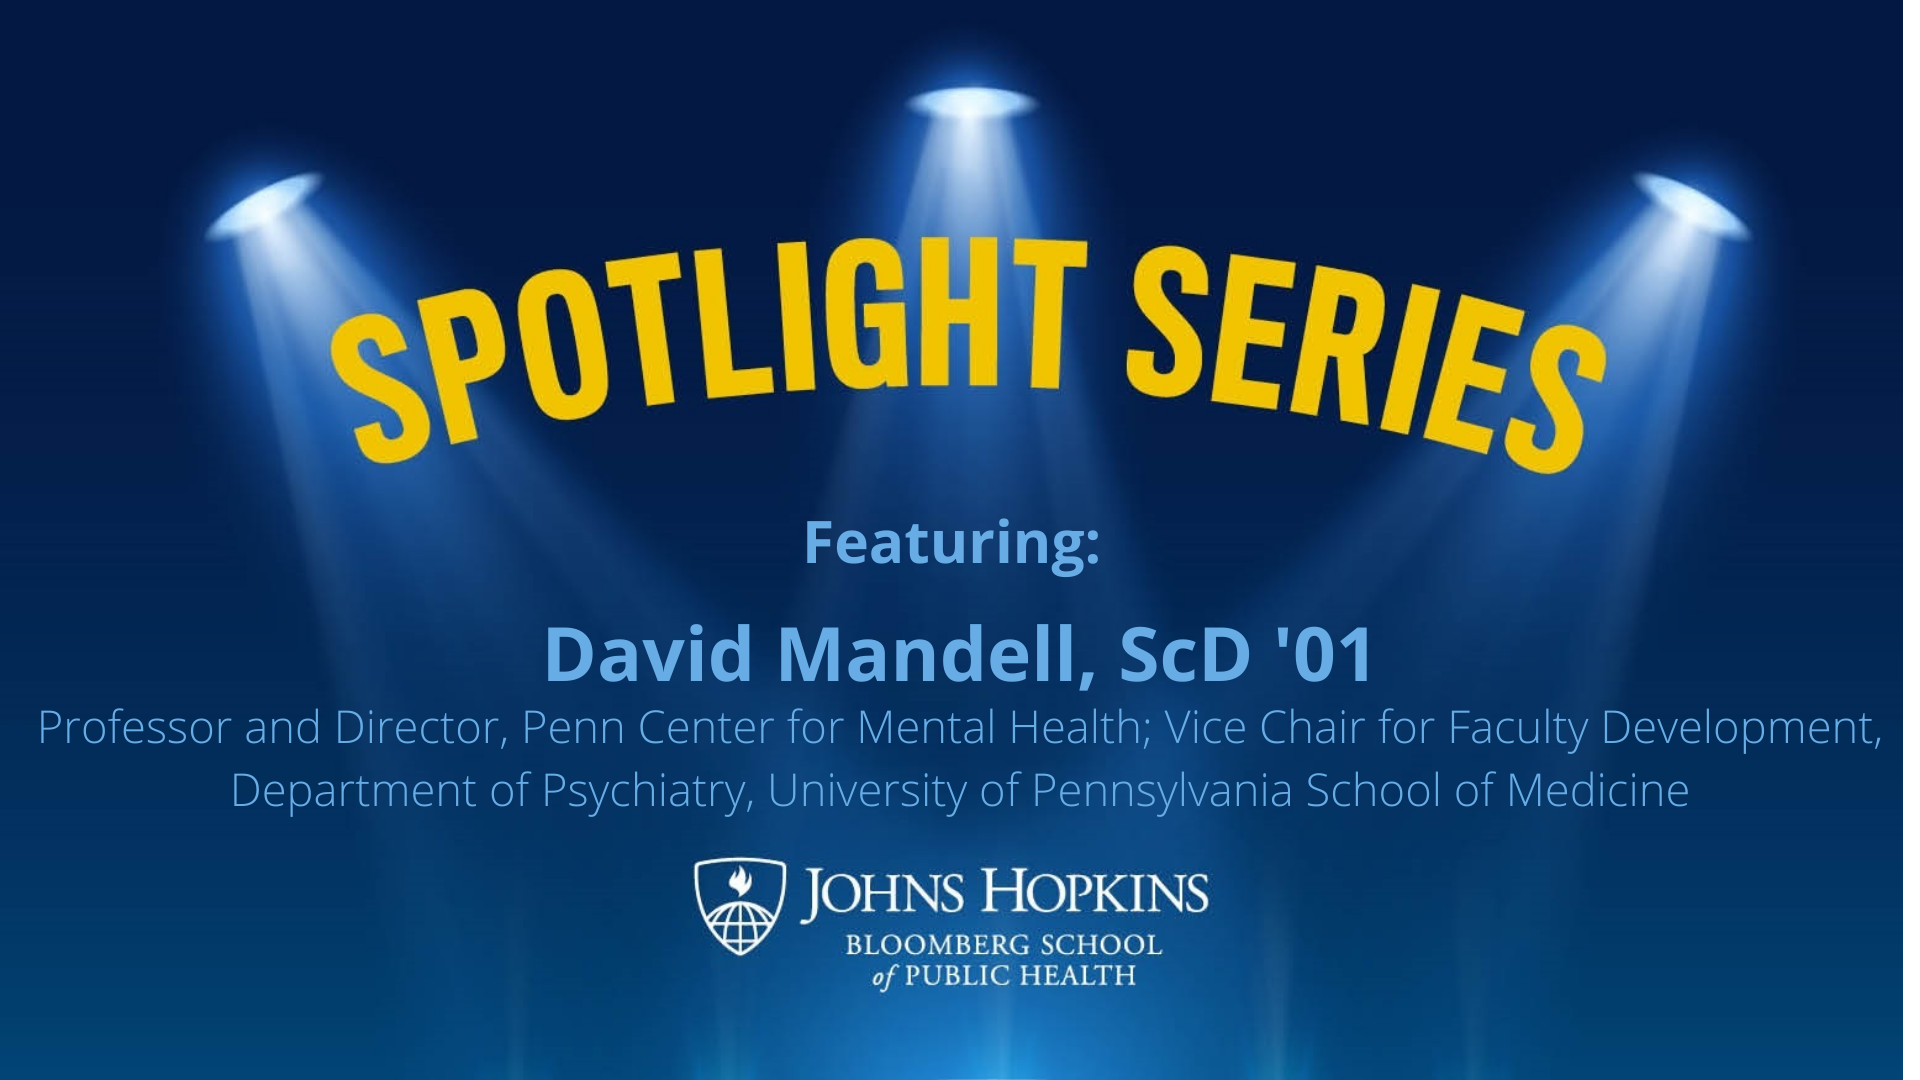 Event information for January 19 Spotlight Series with David Mandell, ScD ‘01 